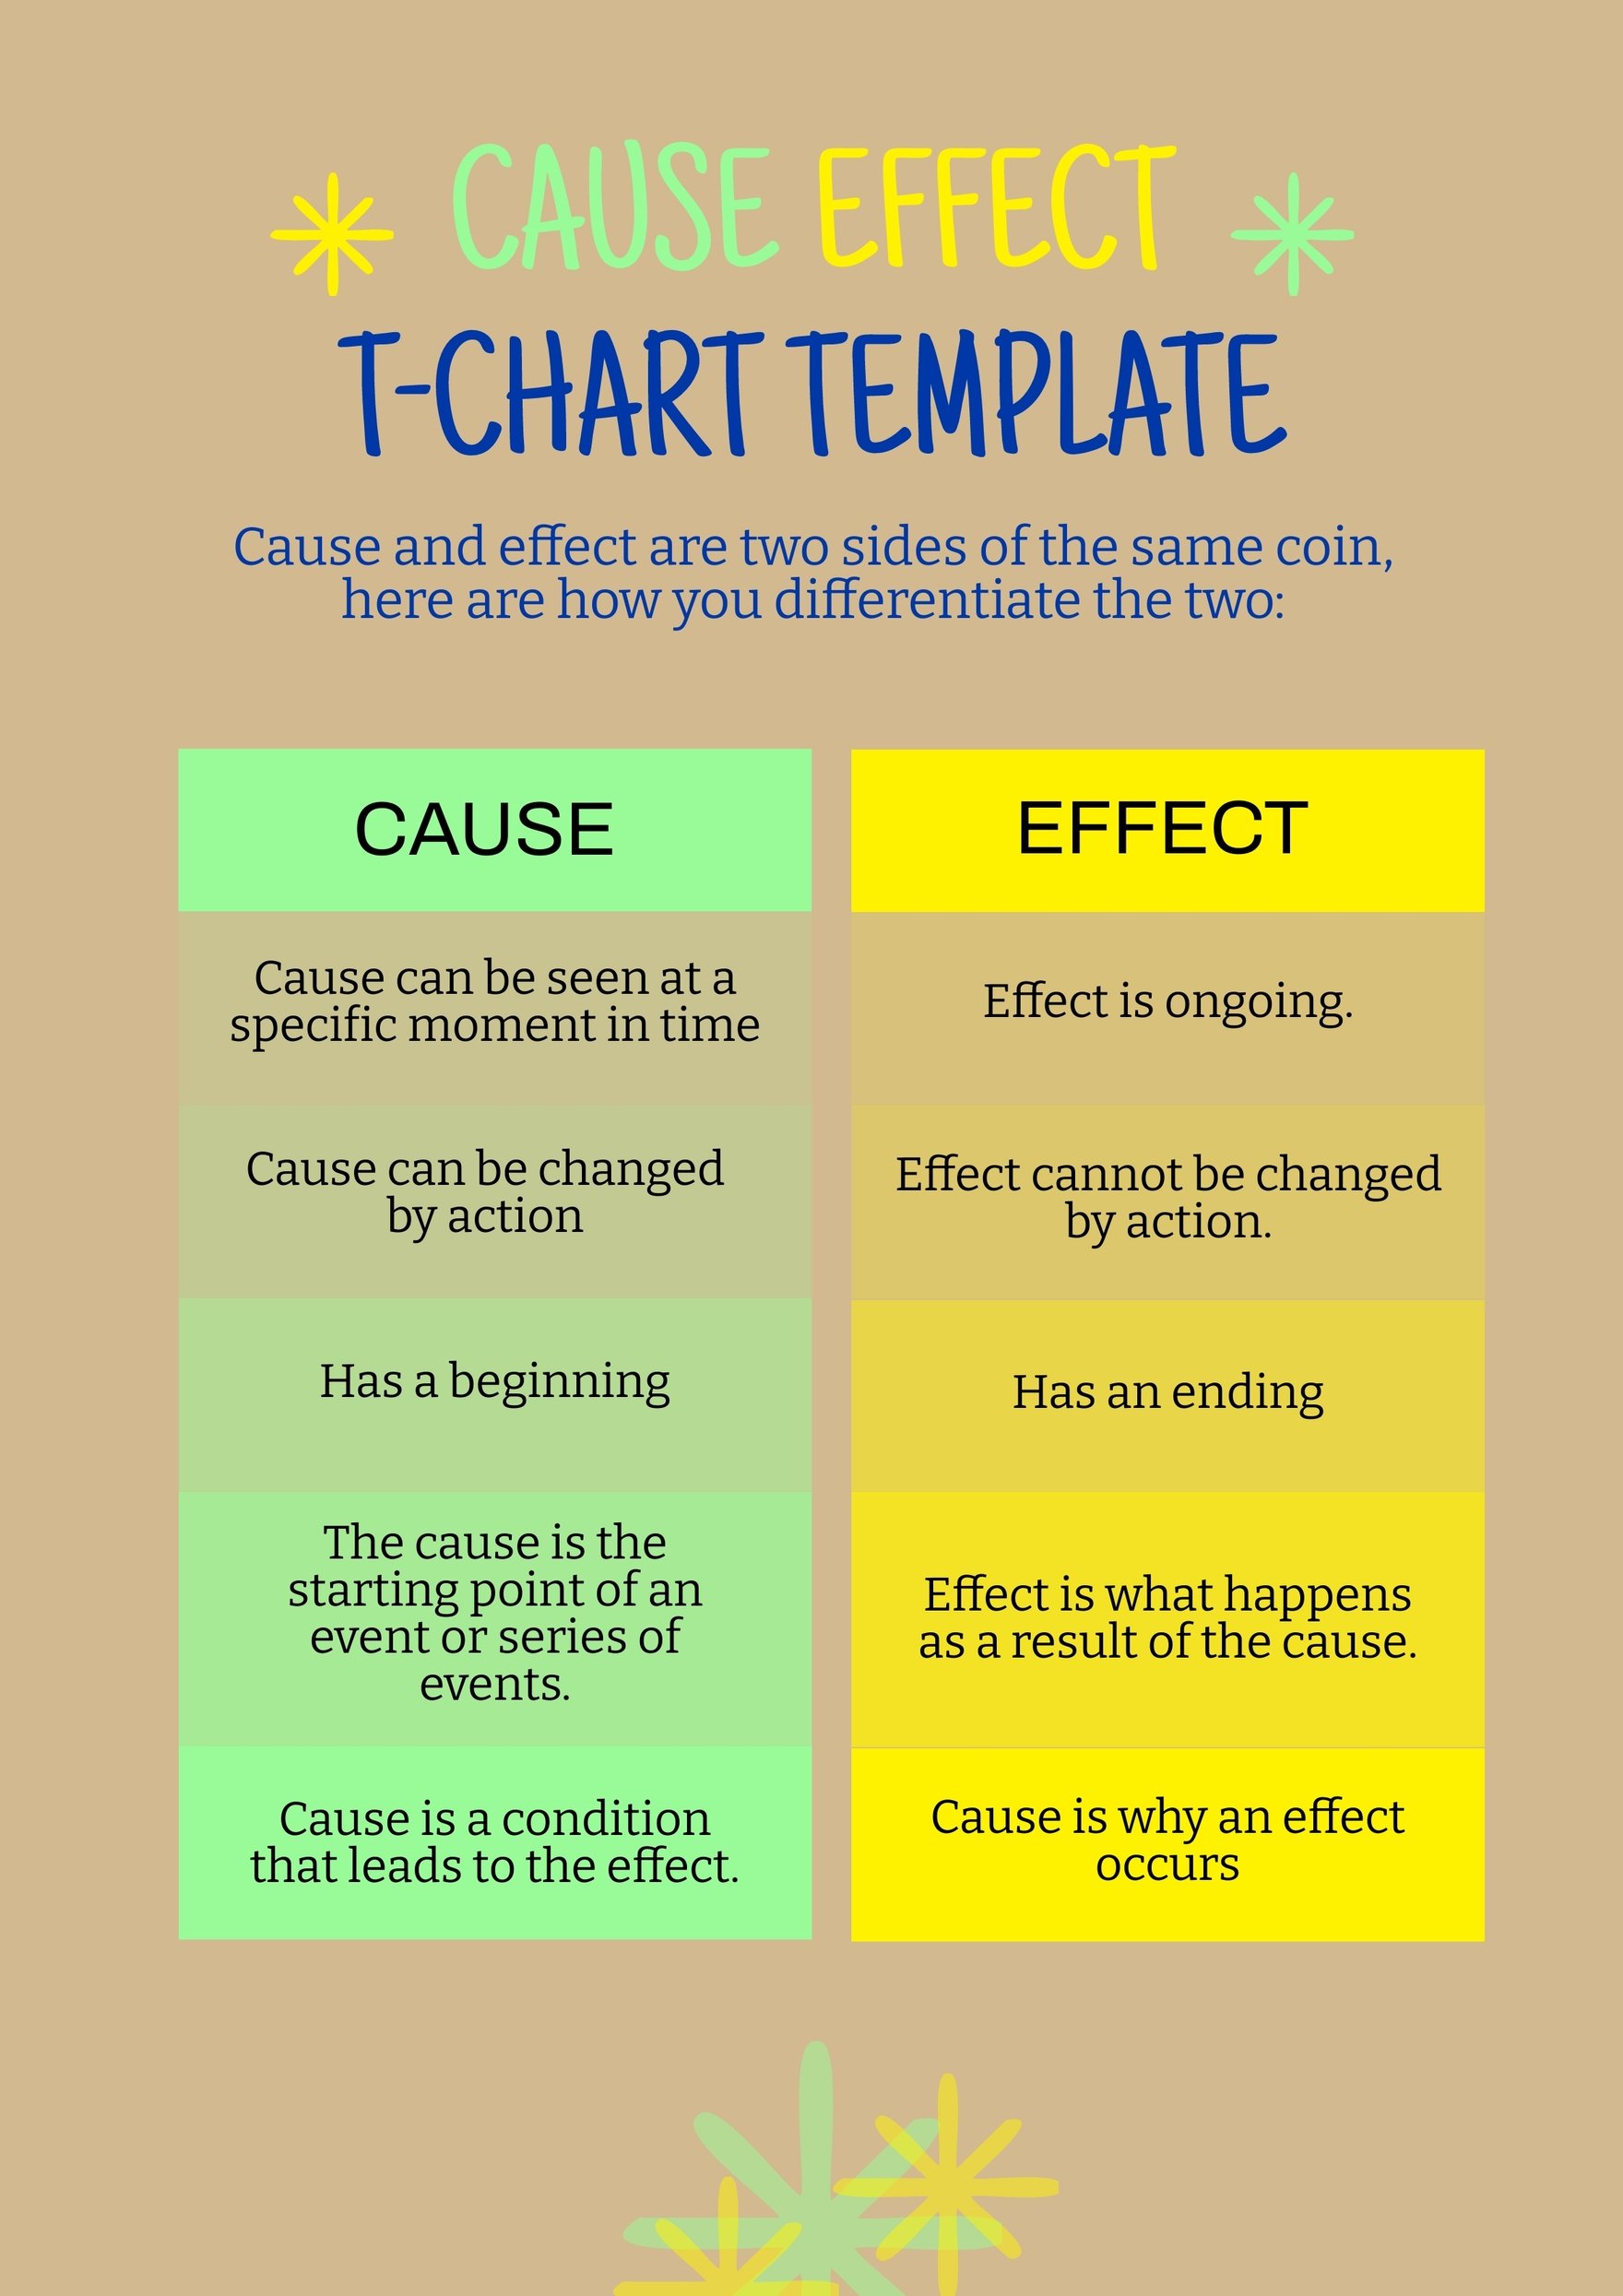 Cause Effect T Chart Template in PDF, Illustrator